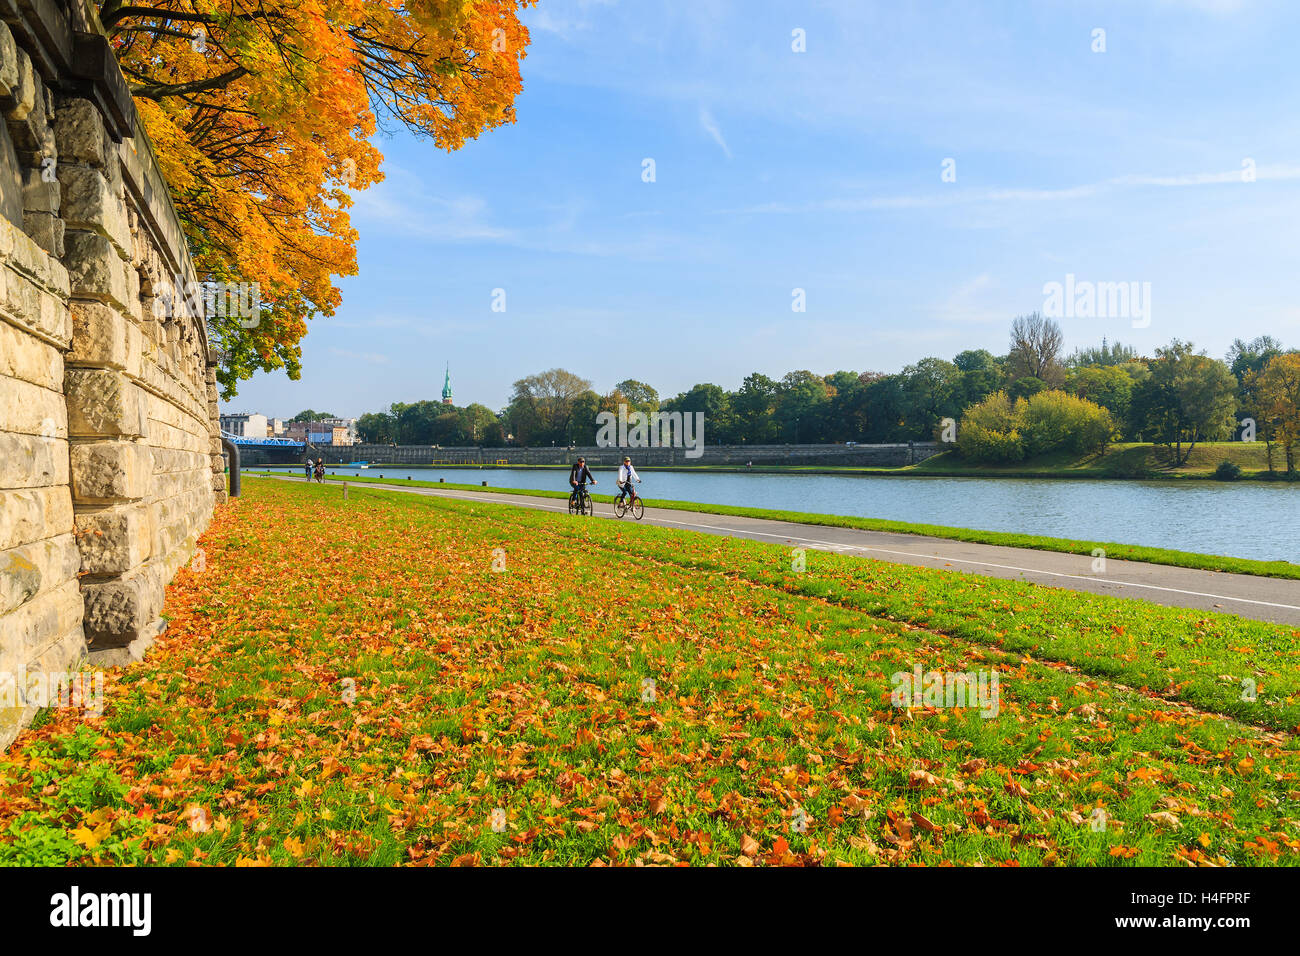 Couple of unidentified people riding bikes along a Vistula river in Krakow on sunny autumn day. Krakow is most visited city in Poland among foreign tourists. Stock Photo